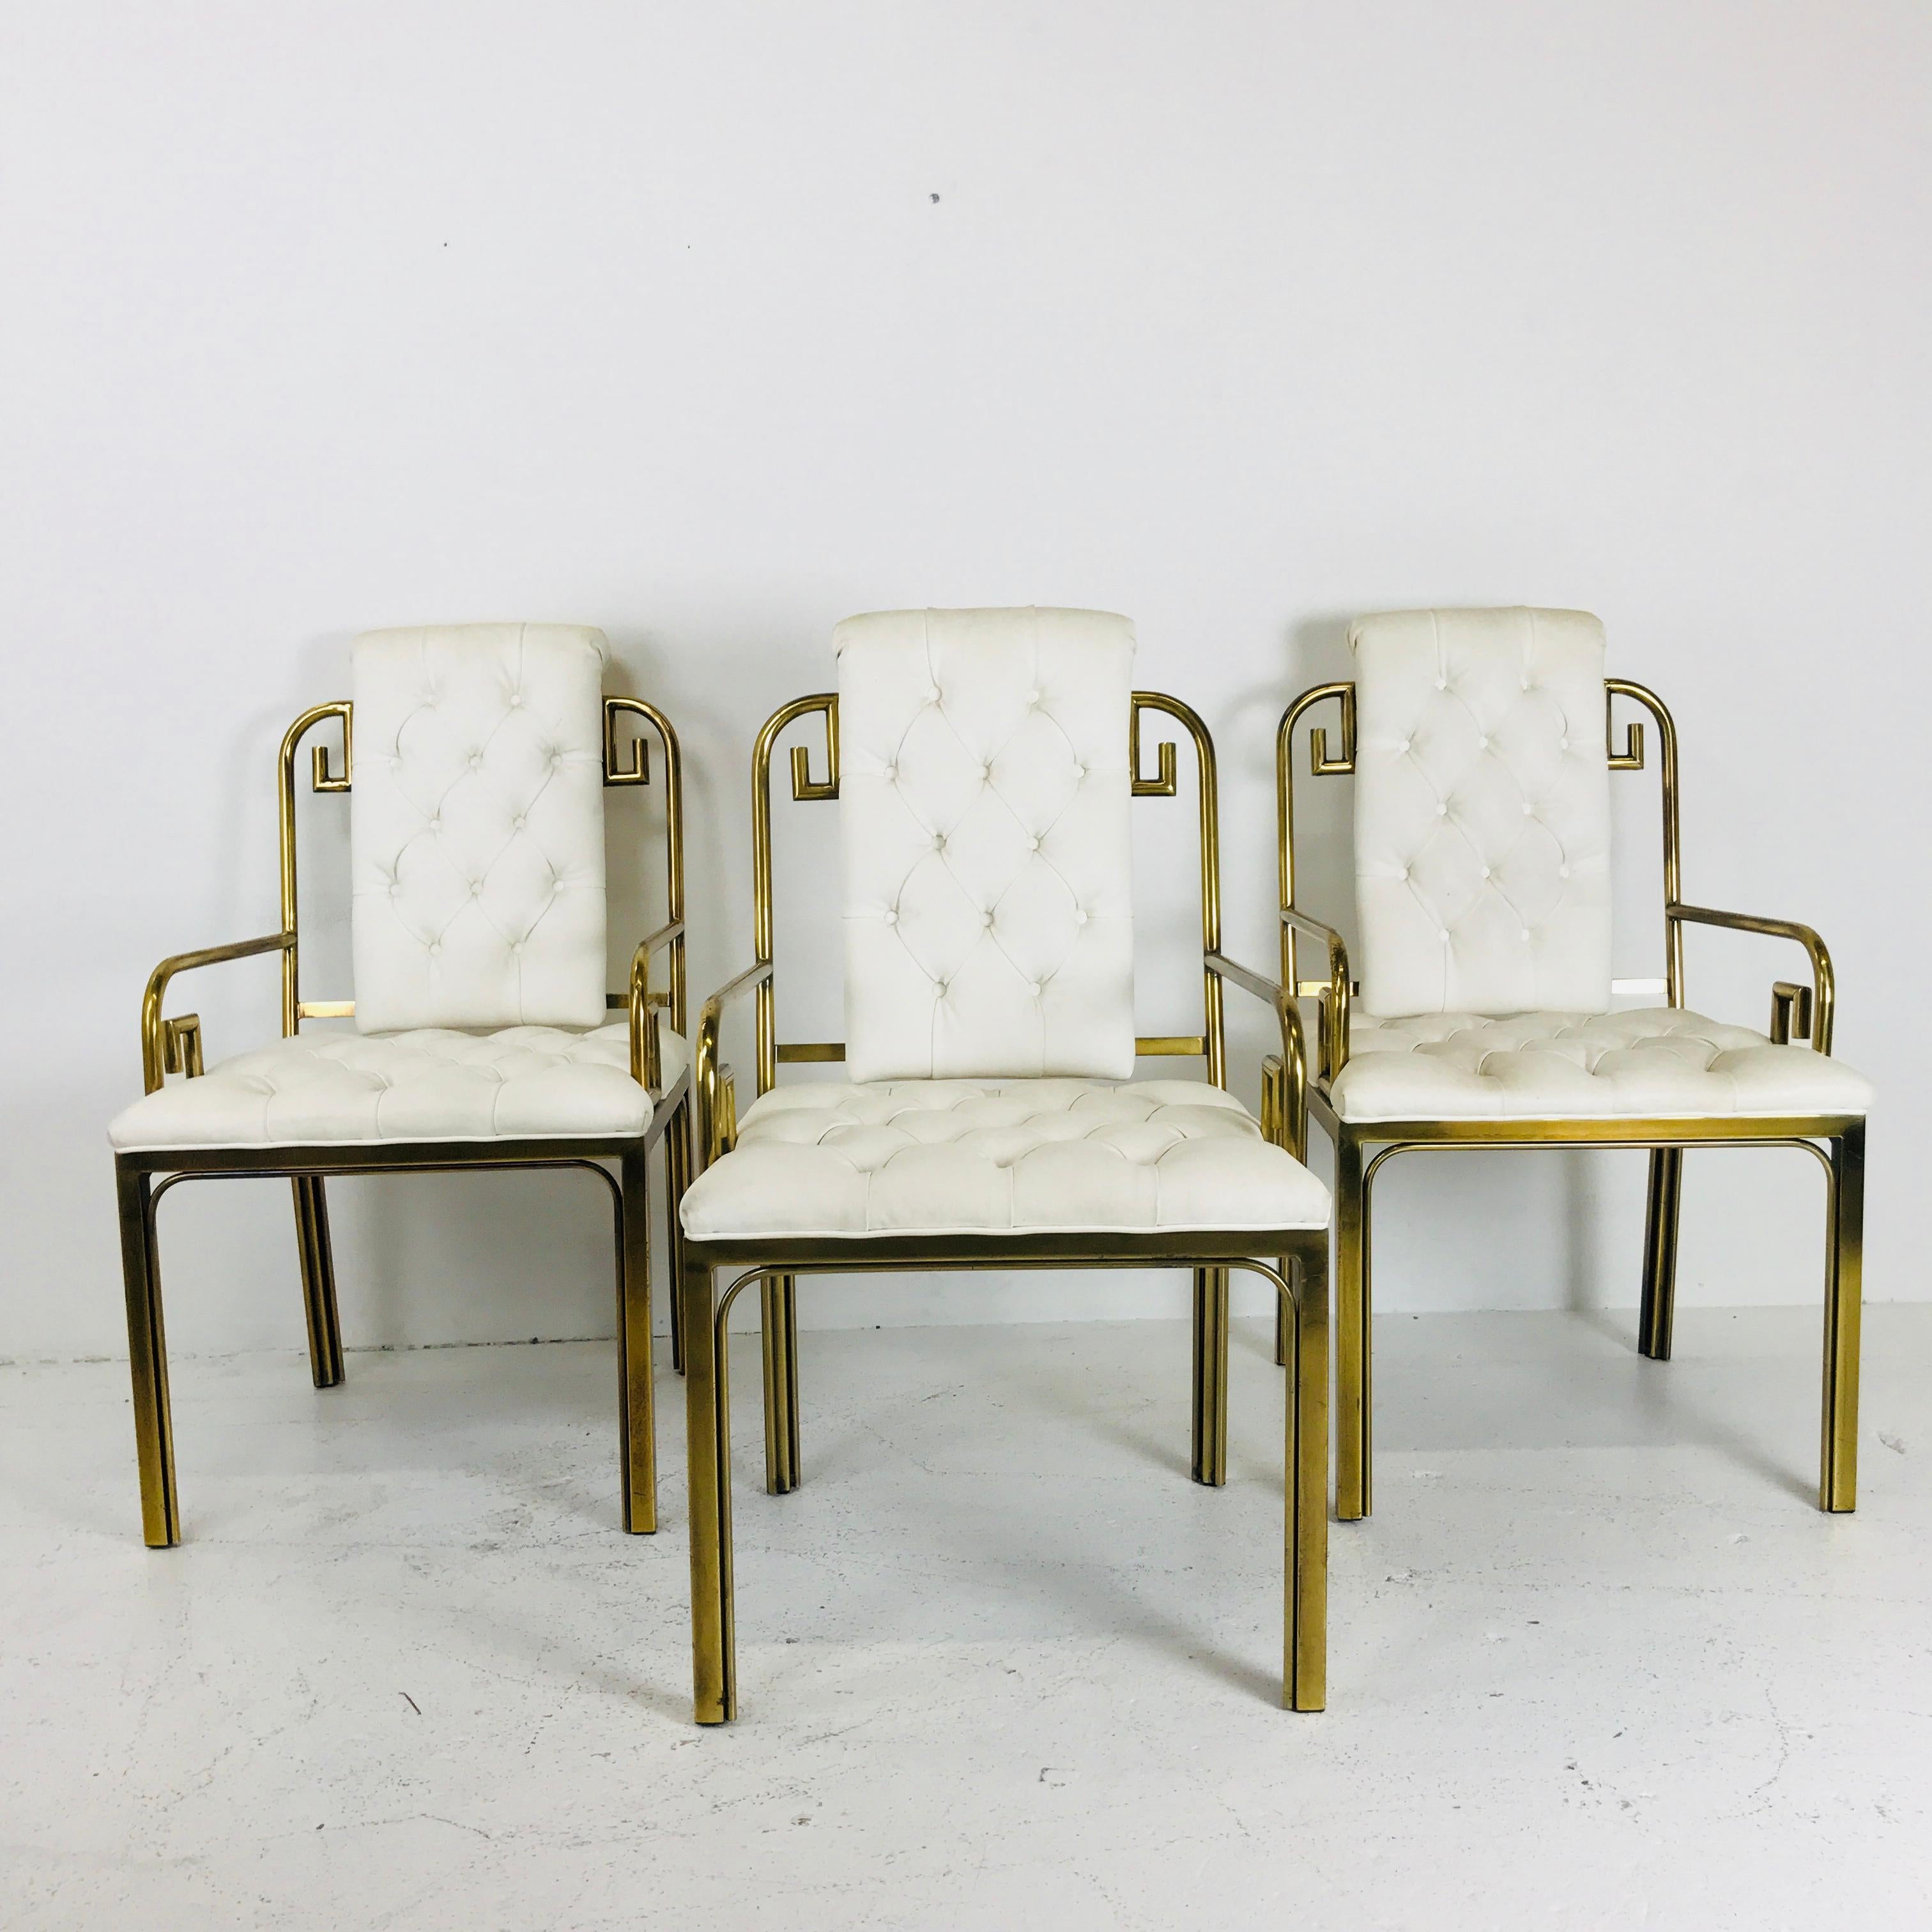 Set of three brass Greek key chairs by Mastercraft. Chairs are in good vintage condition but recommend refinishing brass plating and new upholstery.

Dimensions:
20.5